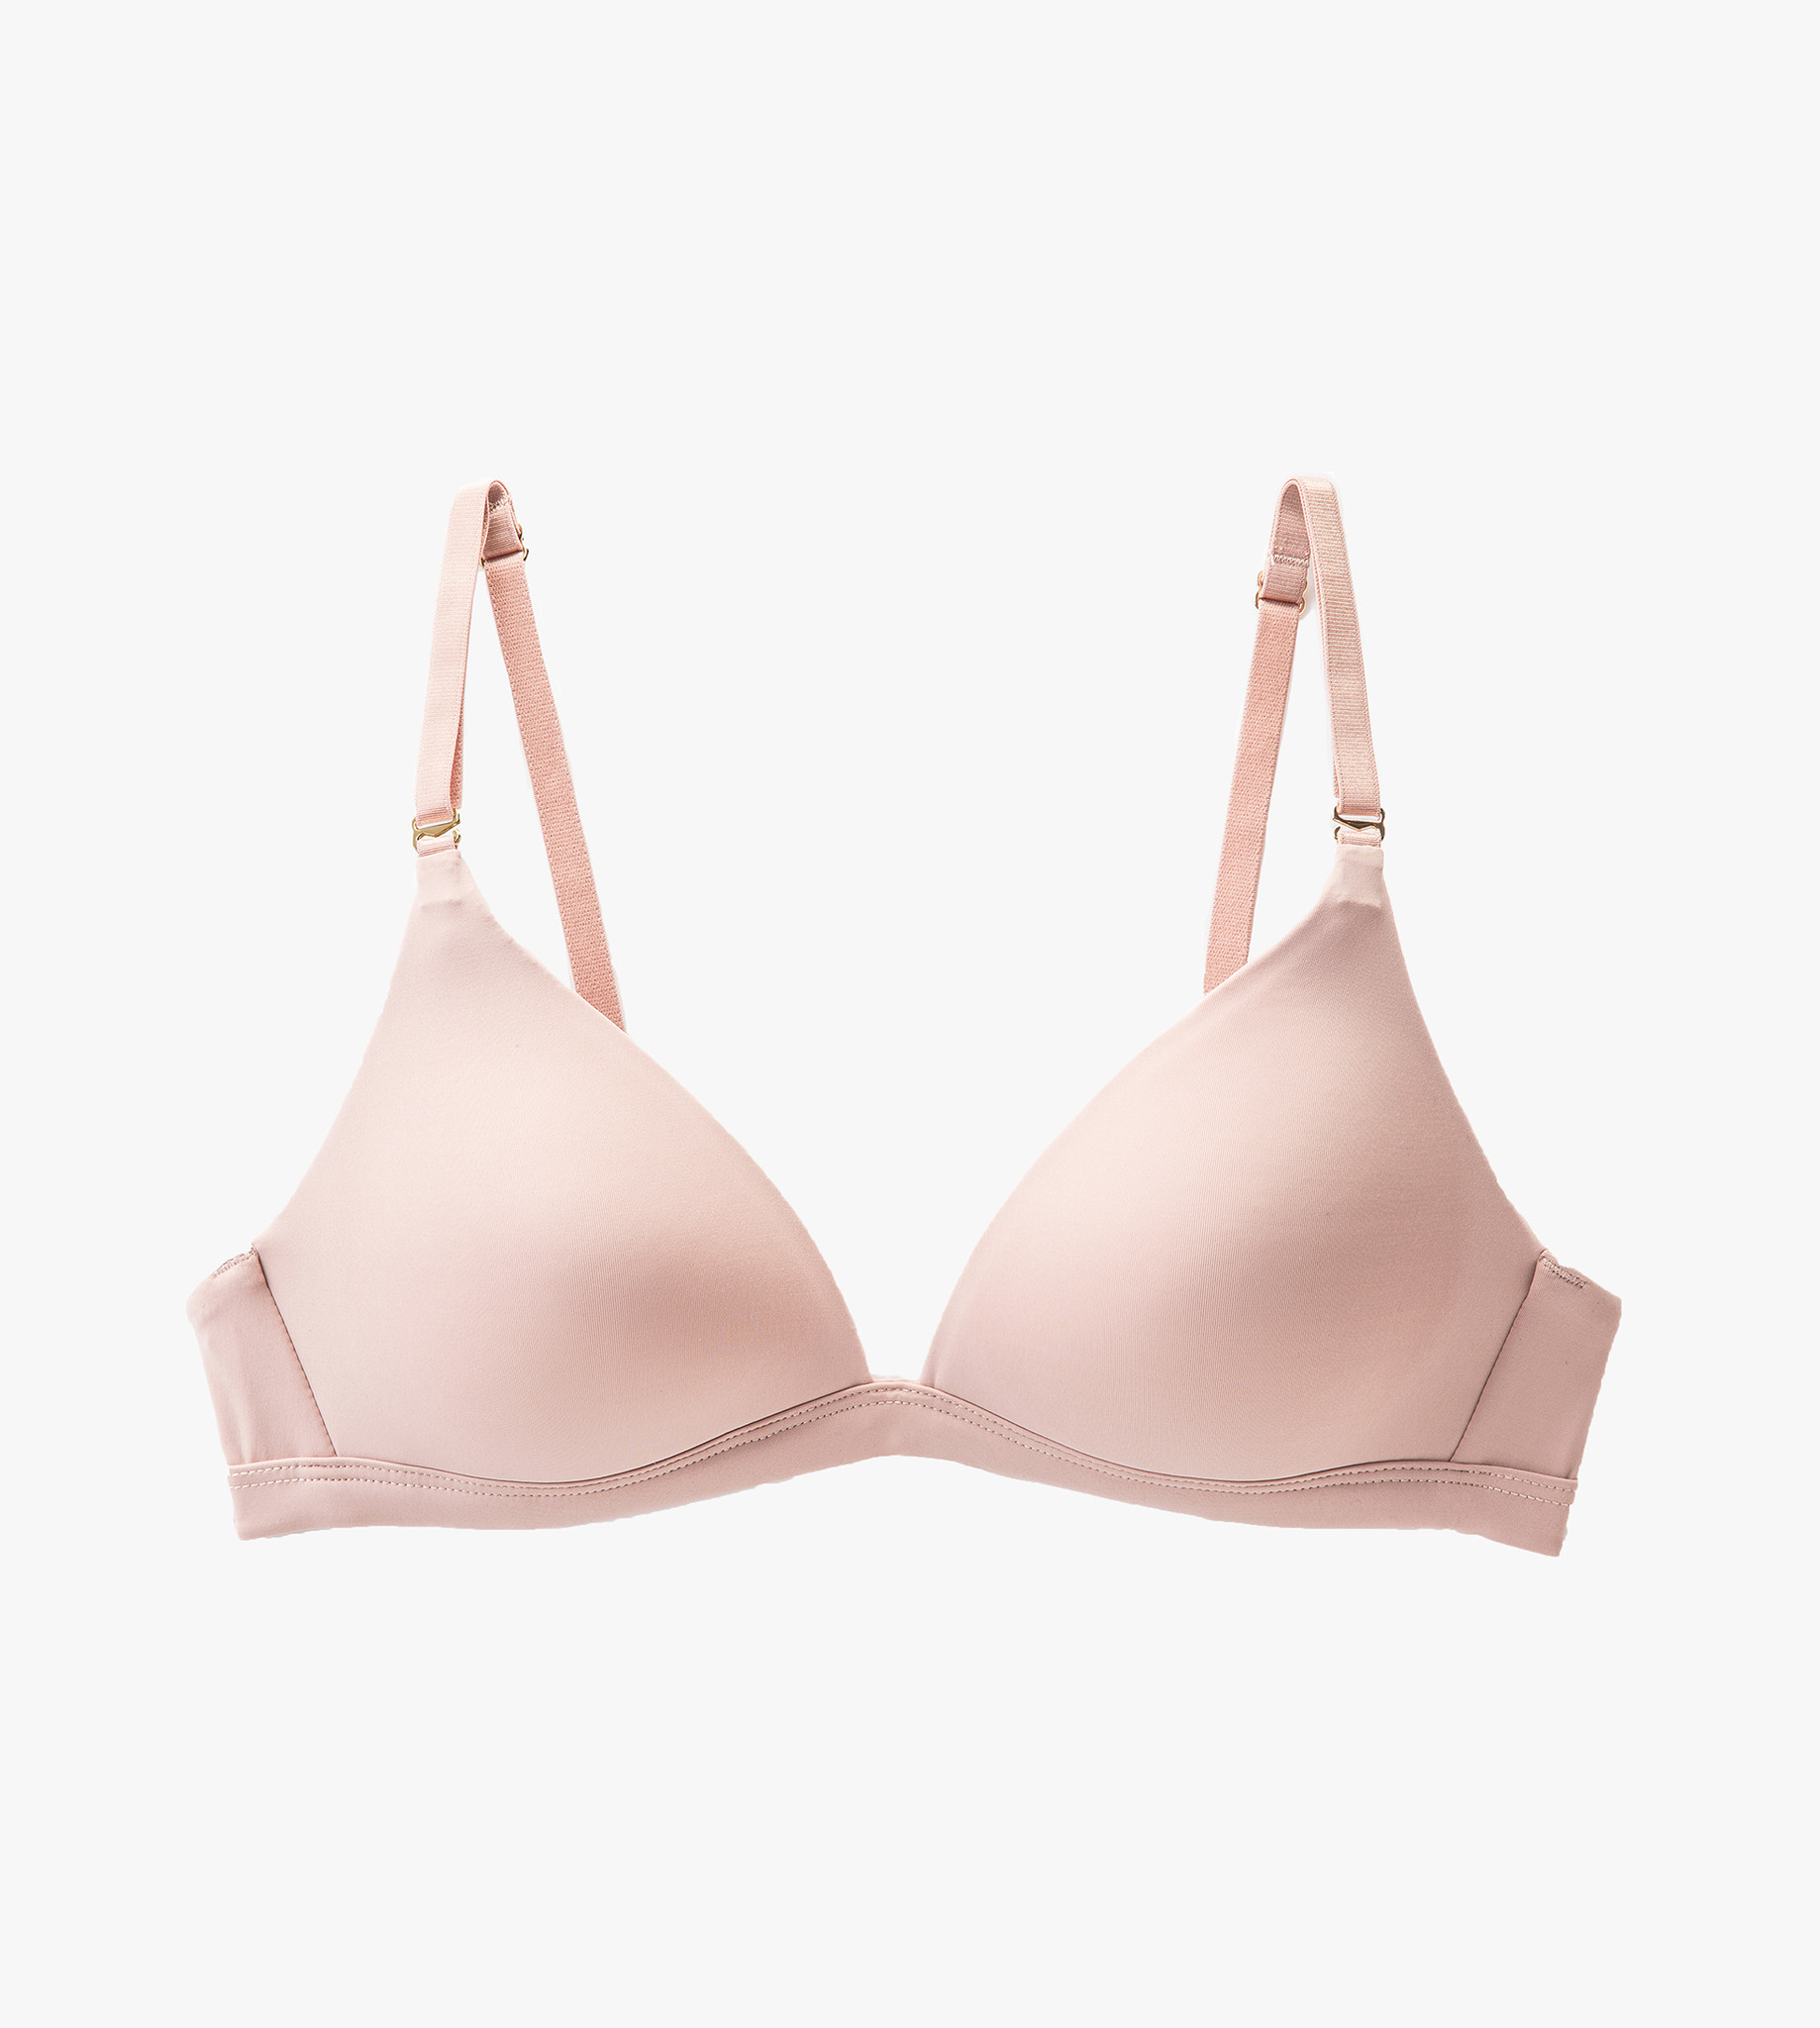 Solving your “Bra-blems” with Third Love